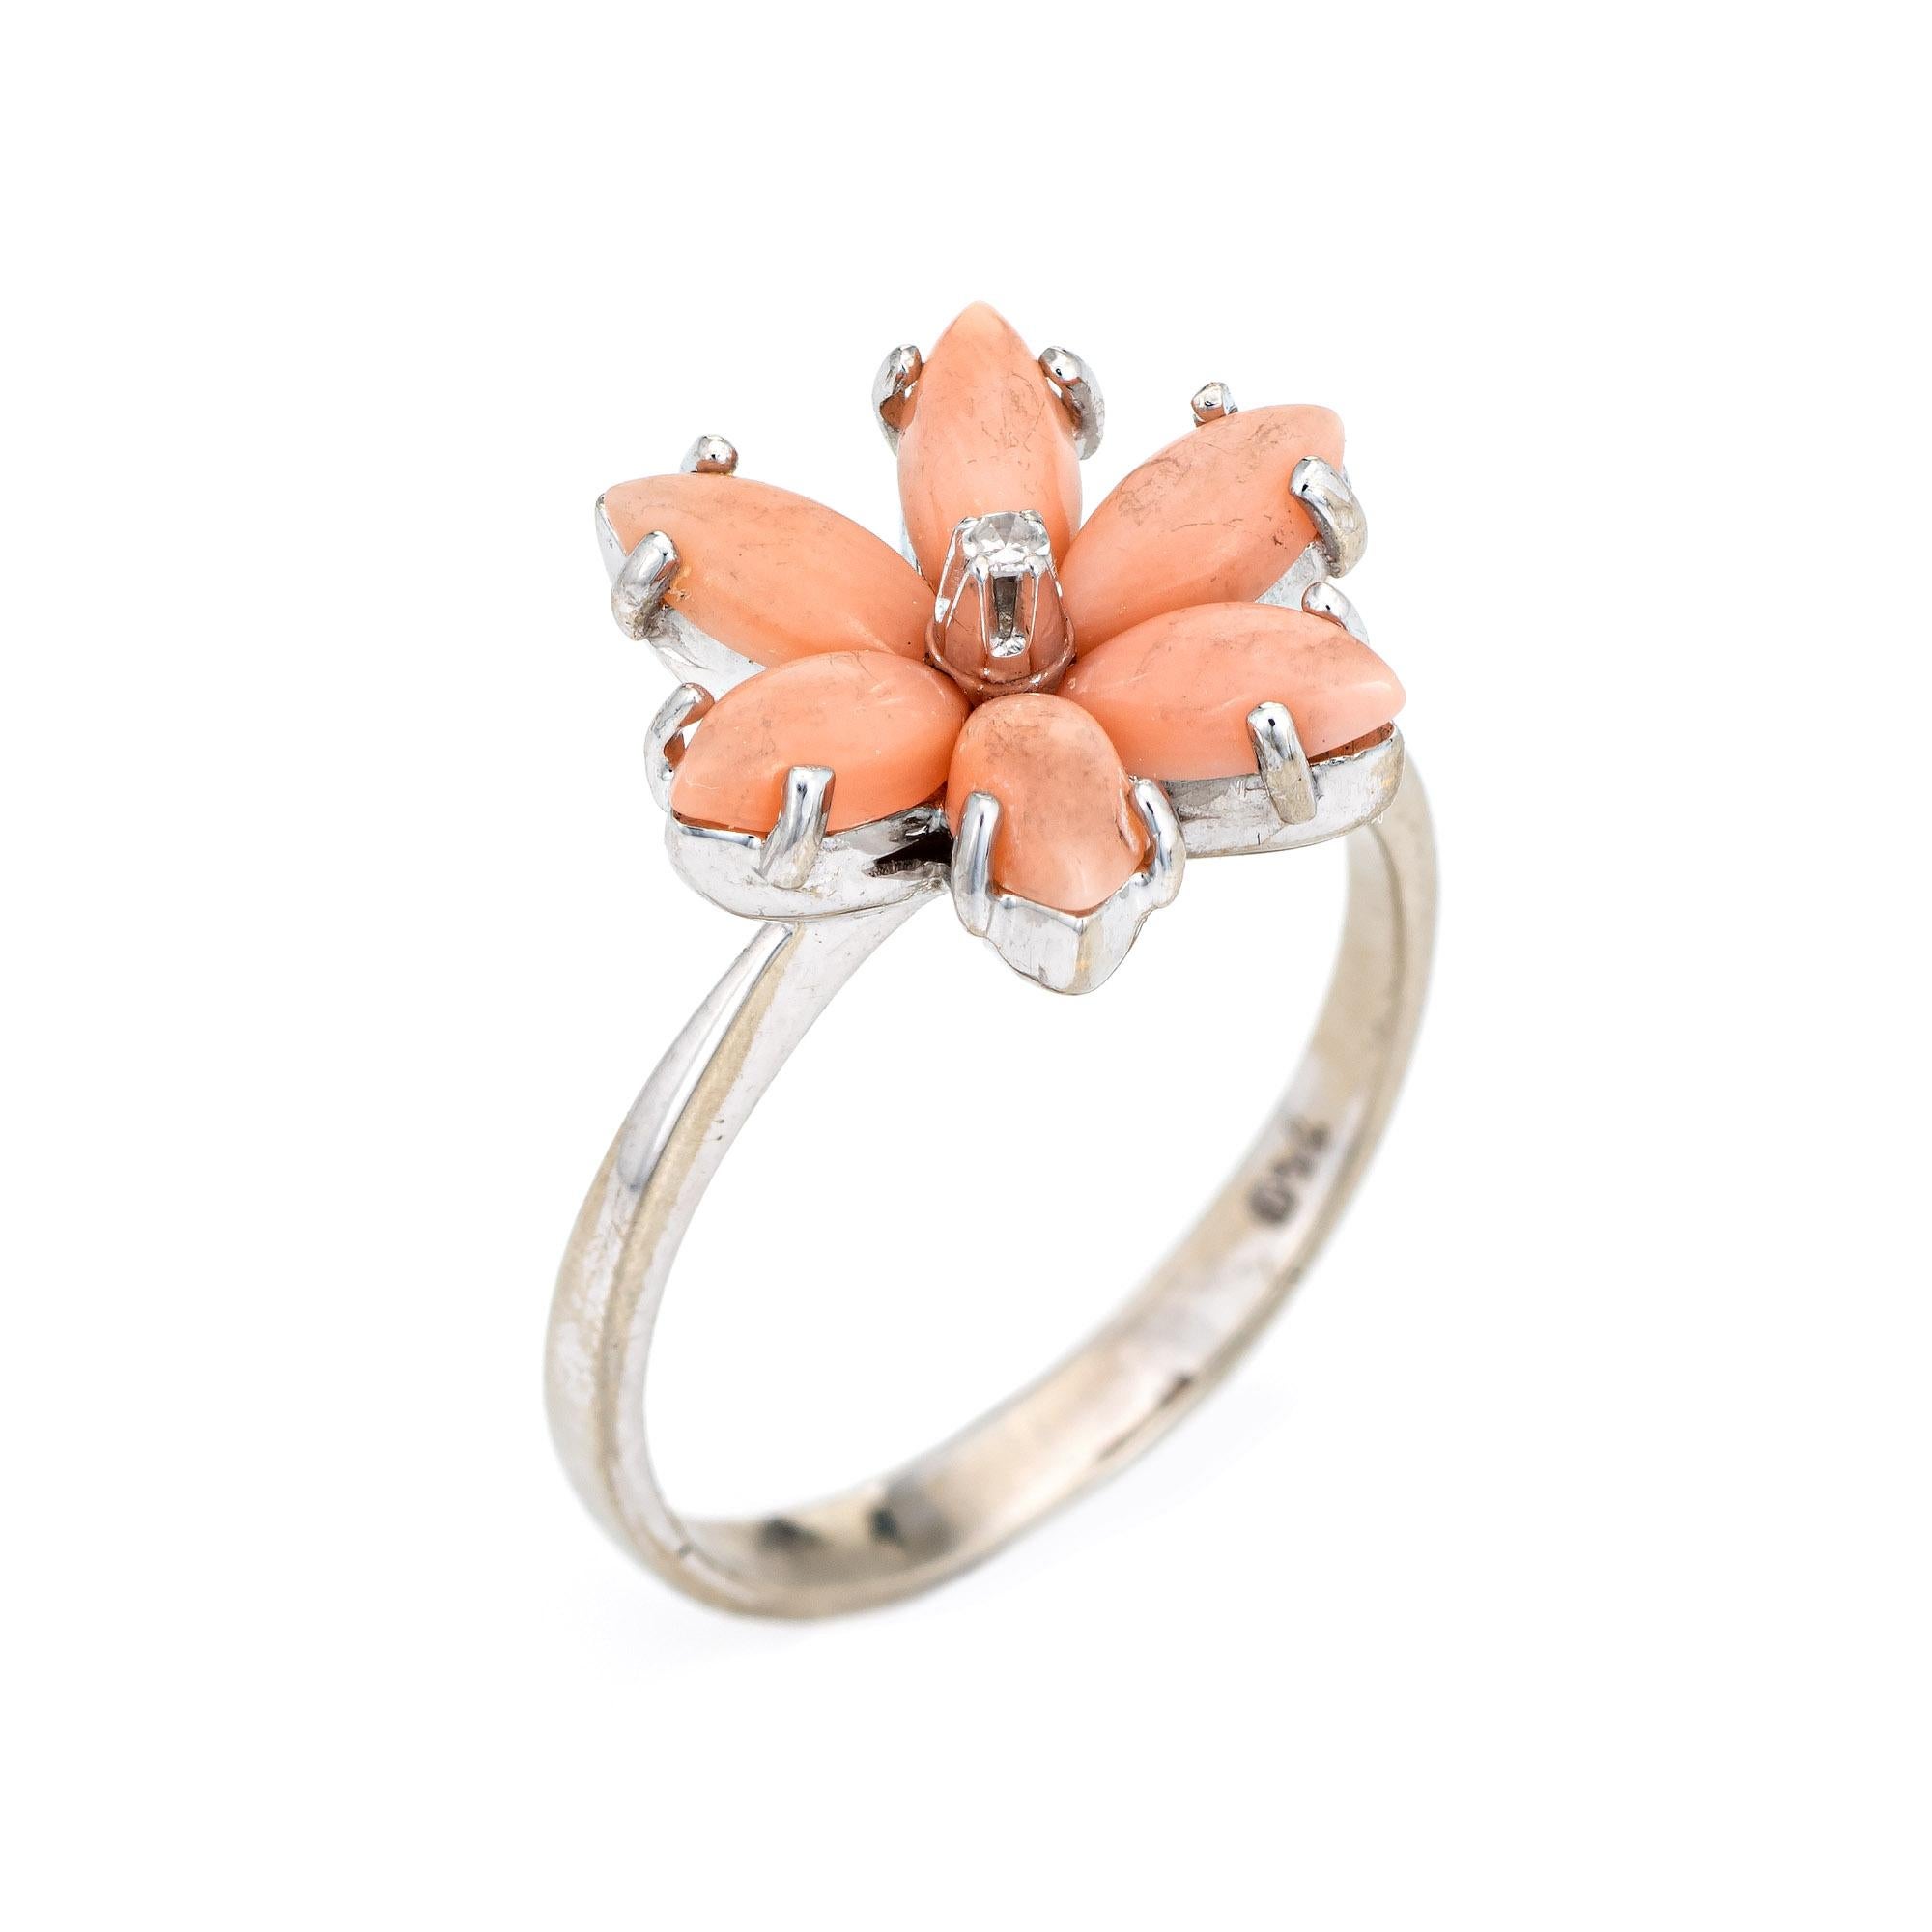 Stylish angel skin coral flower cocktail ring crafted in 18 karat white gold. 

Cabochon cut coral measures 6mm x 3mm (estimated at 0.25 carats each - 1.50 carats total estimated weight). One estimated 0.01 carat (estimated at H-I color and SI1